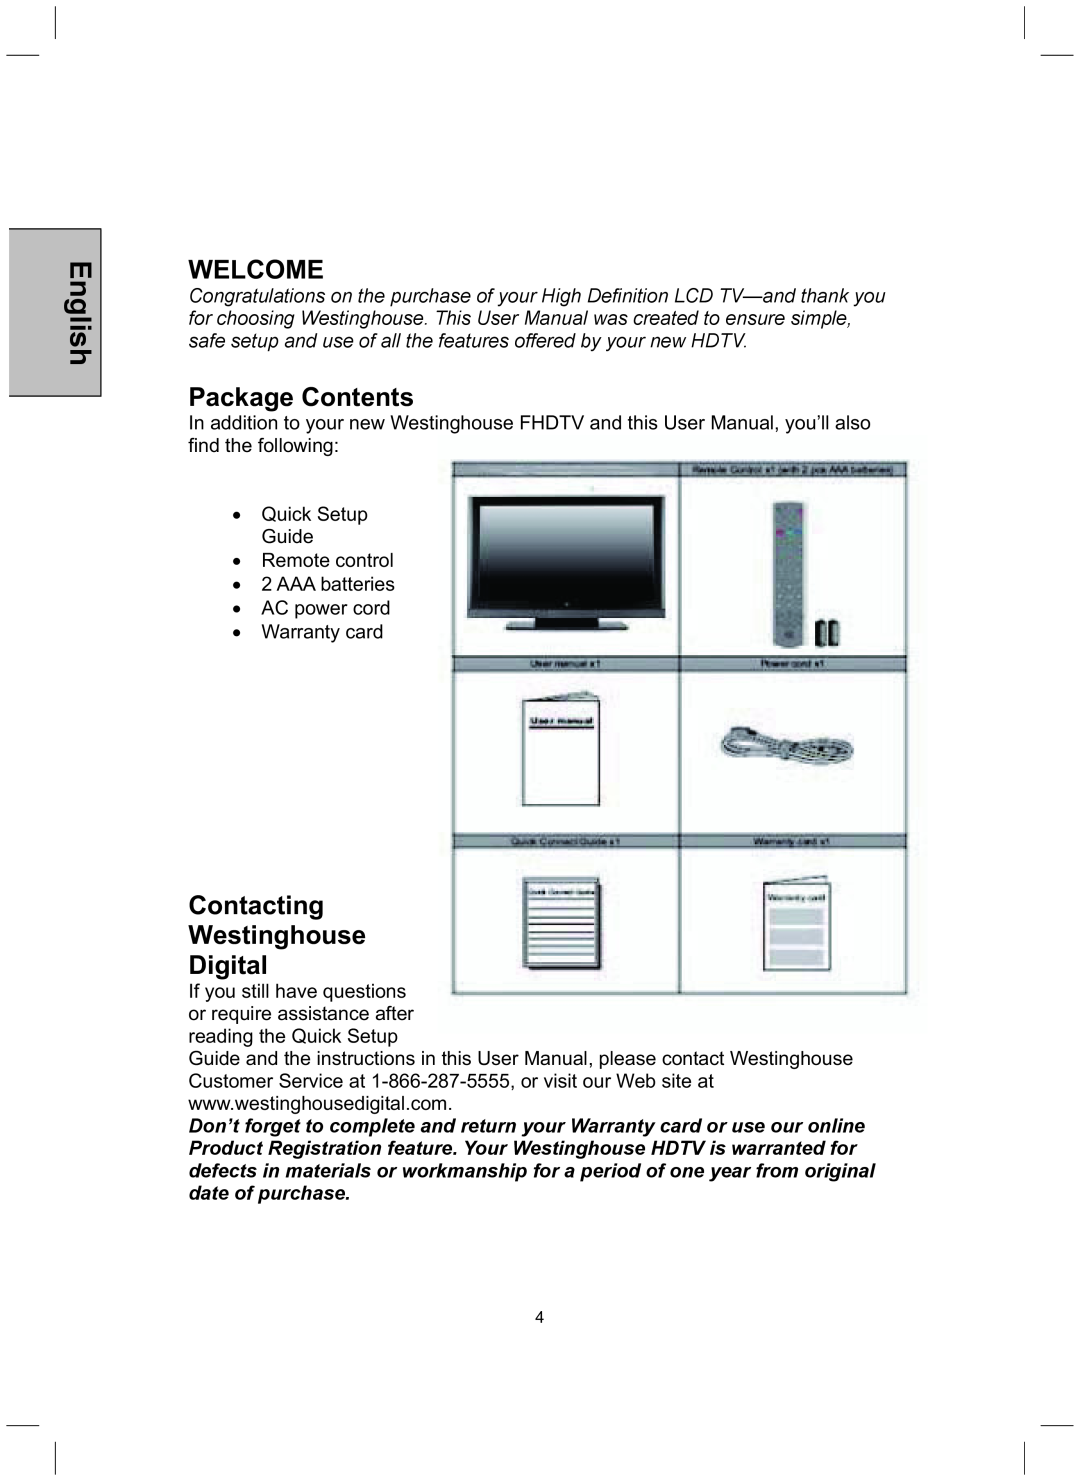 Westinghouse TX-52H480S user manual Welcome, Package Contents, Contacting Westinghouse Digital, English 